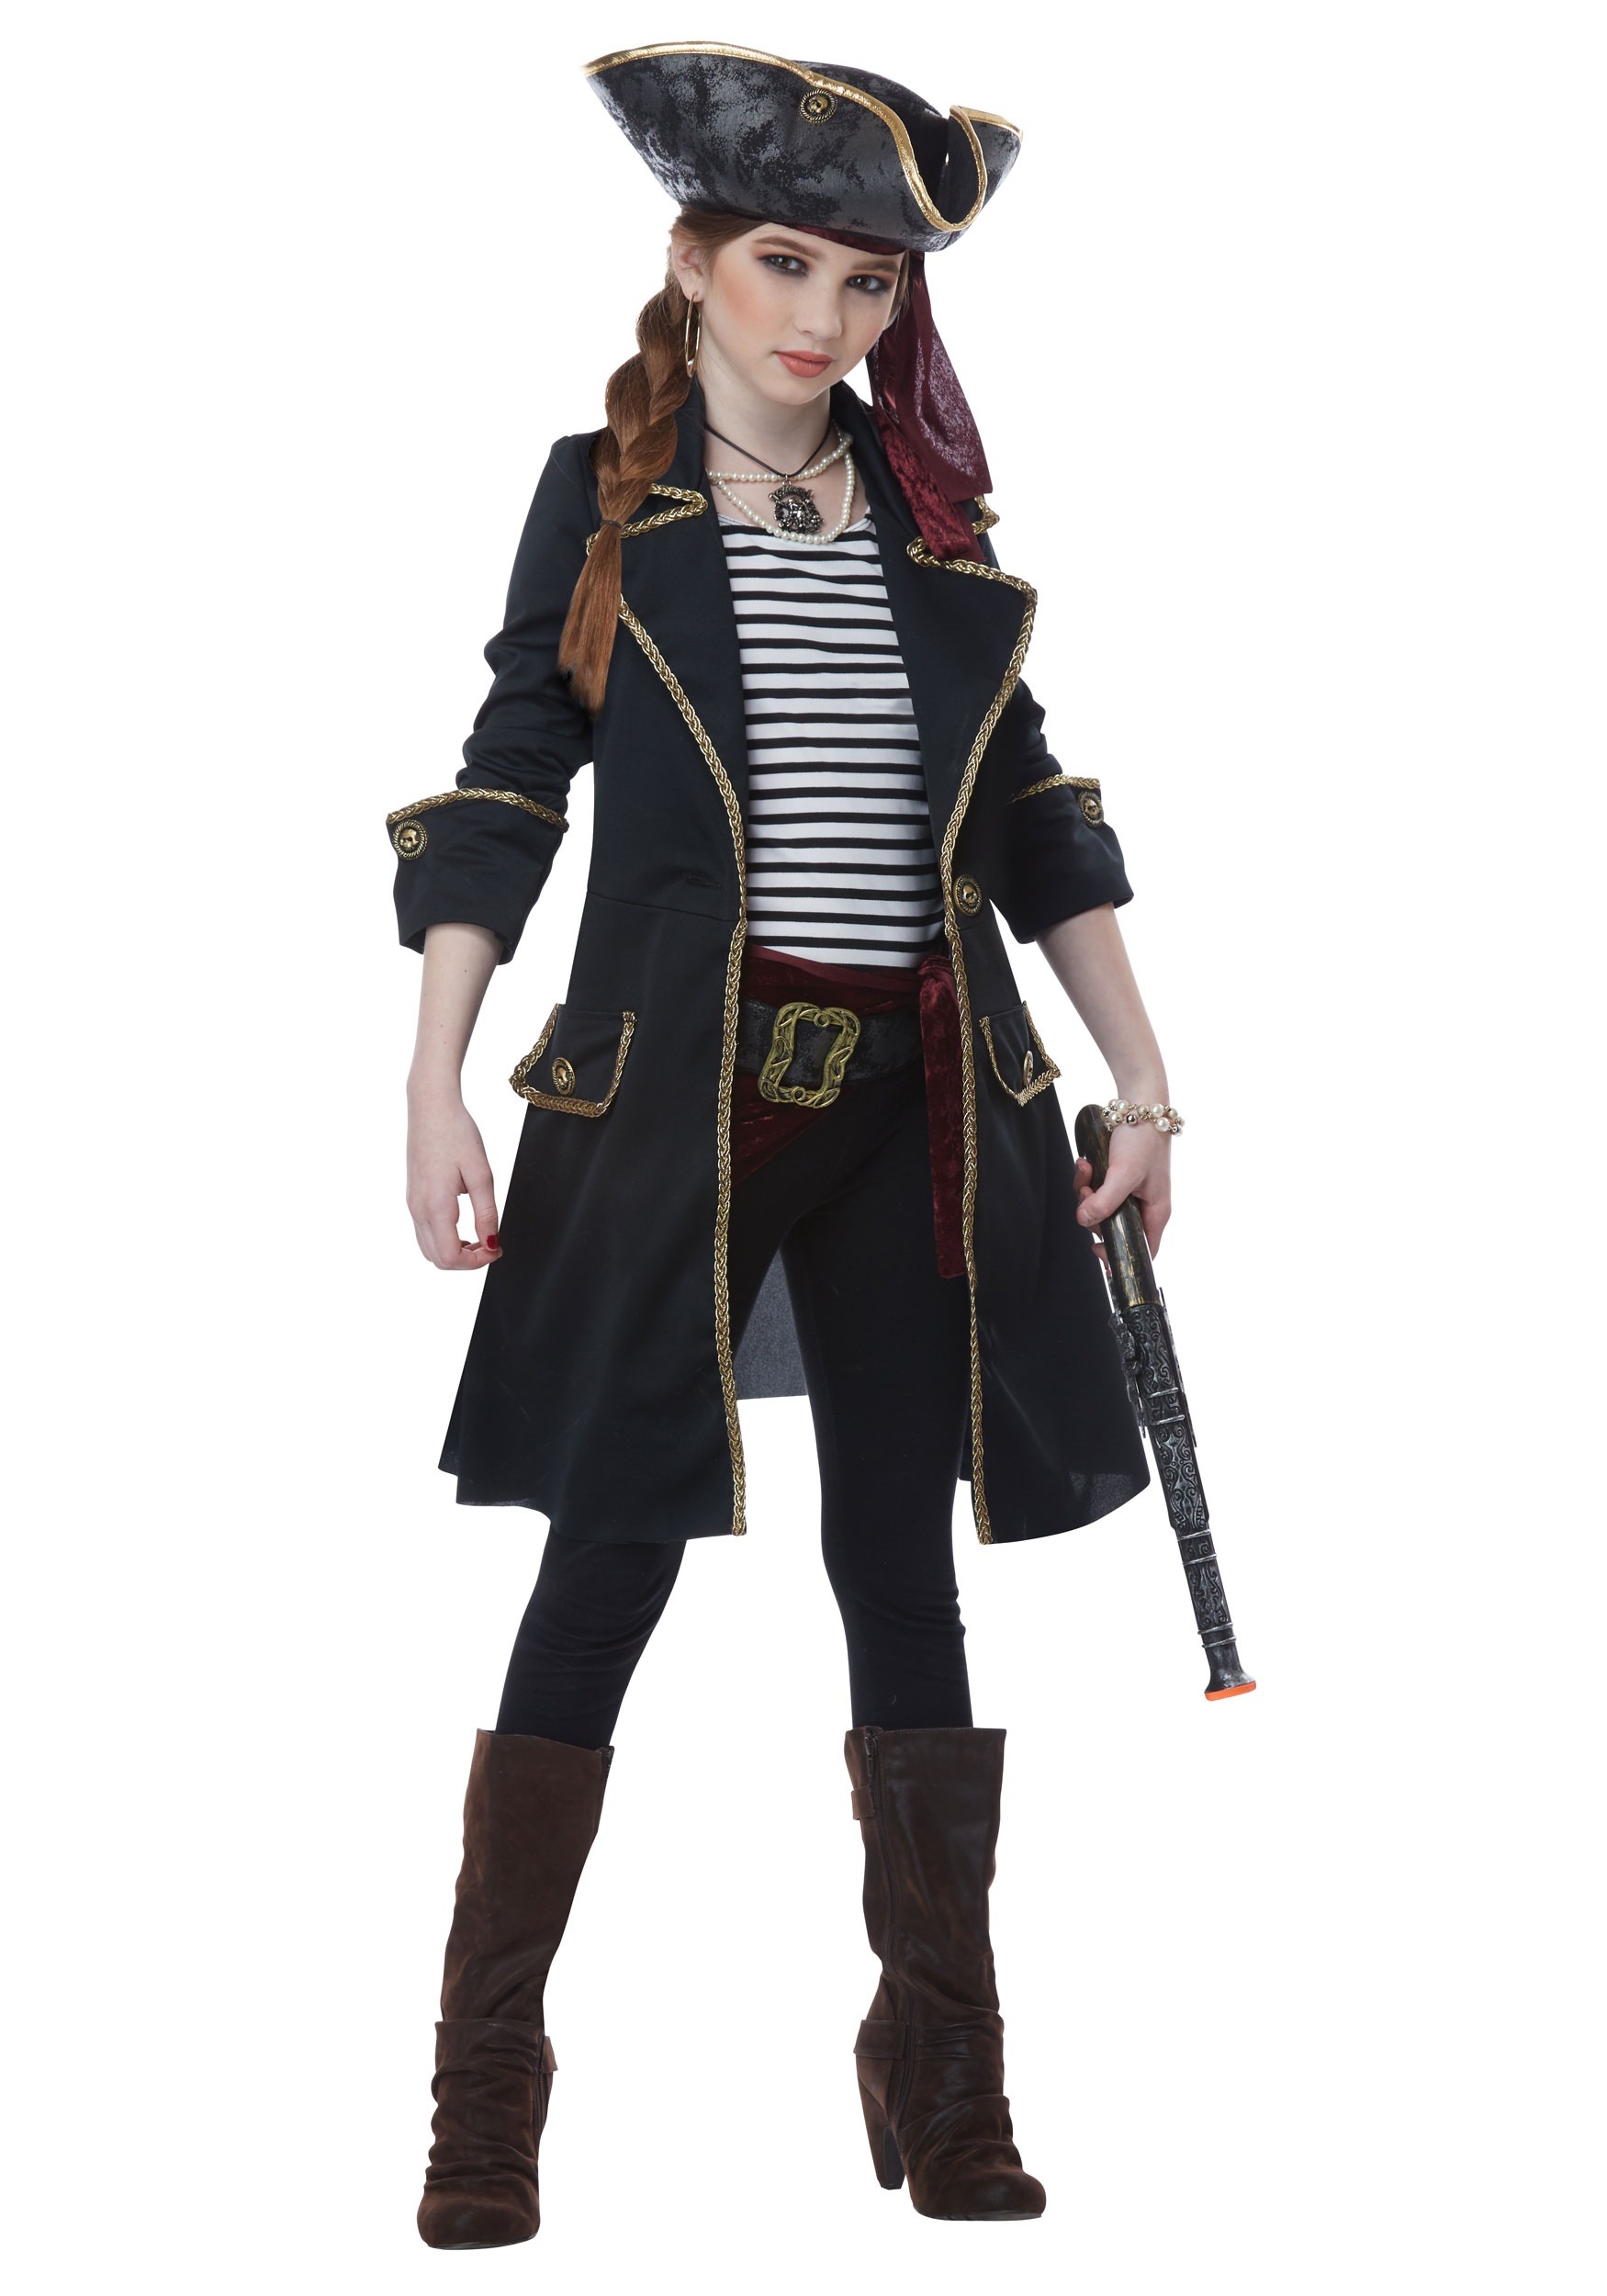 Photos - Fancy Dress California Costume Collection High Seas Captain Costume for Girls Black 